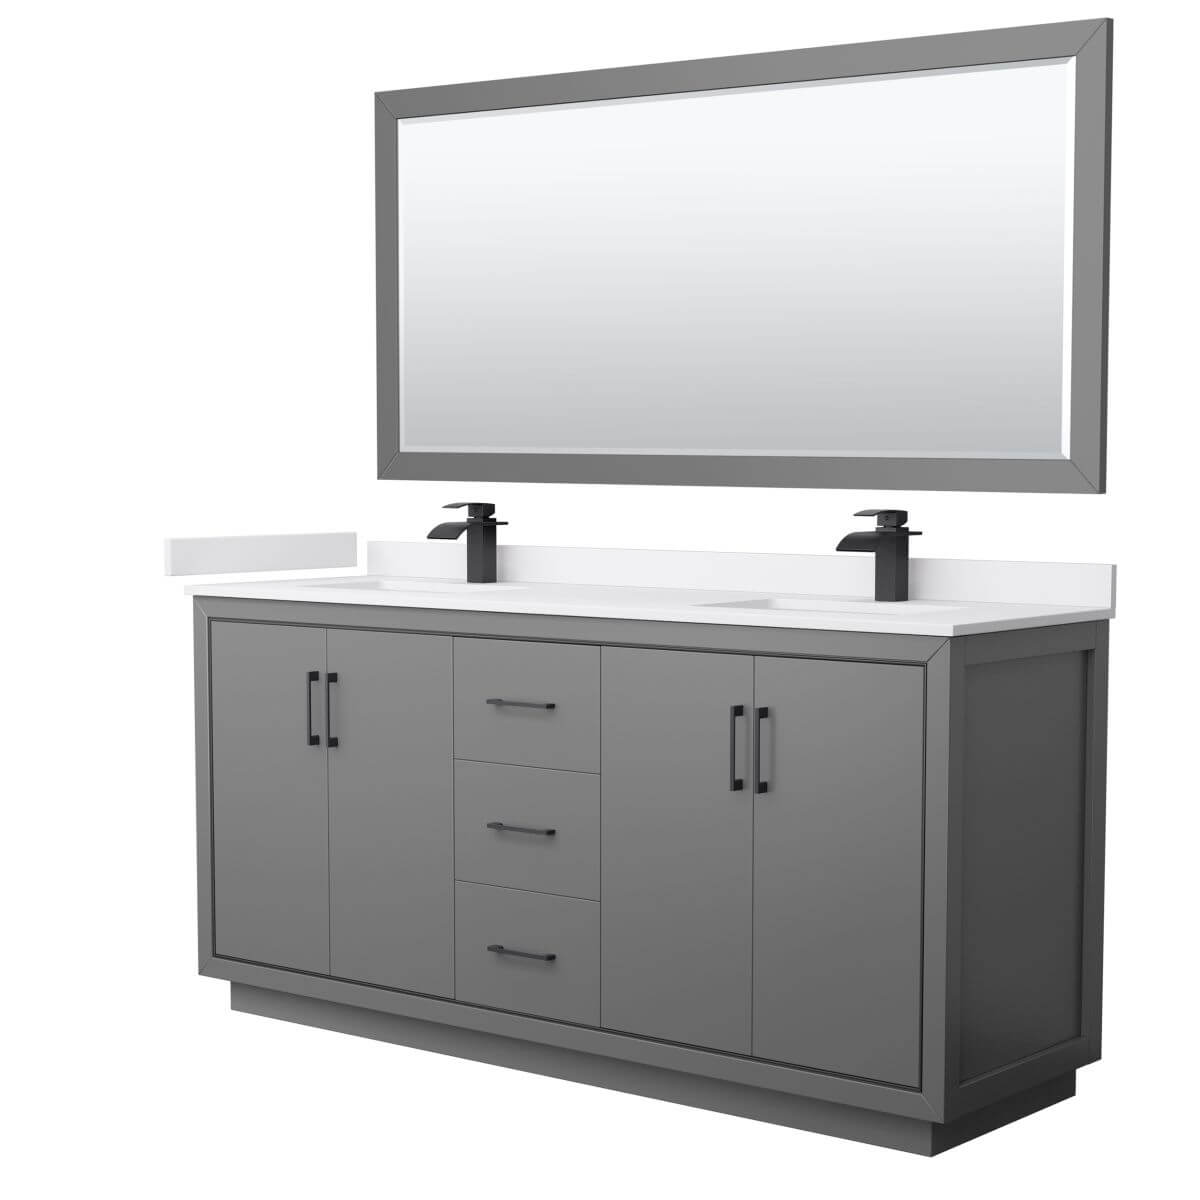 Wyndham Collection WCF111172DGBWCUNSM70 Icon 72 inch Double Bathroom Vanity in Dark Gray with White Cultured Marble Countertop, Undermount Square Sinks, Matte Black Trim and 70 Inch Mirror